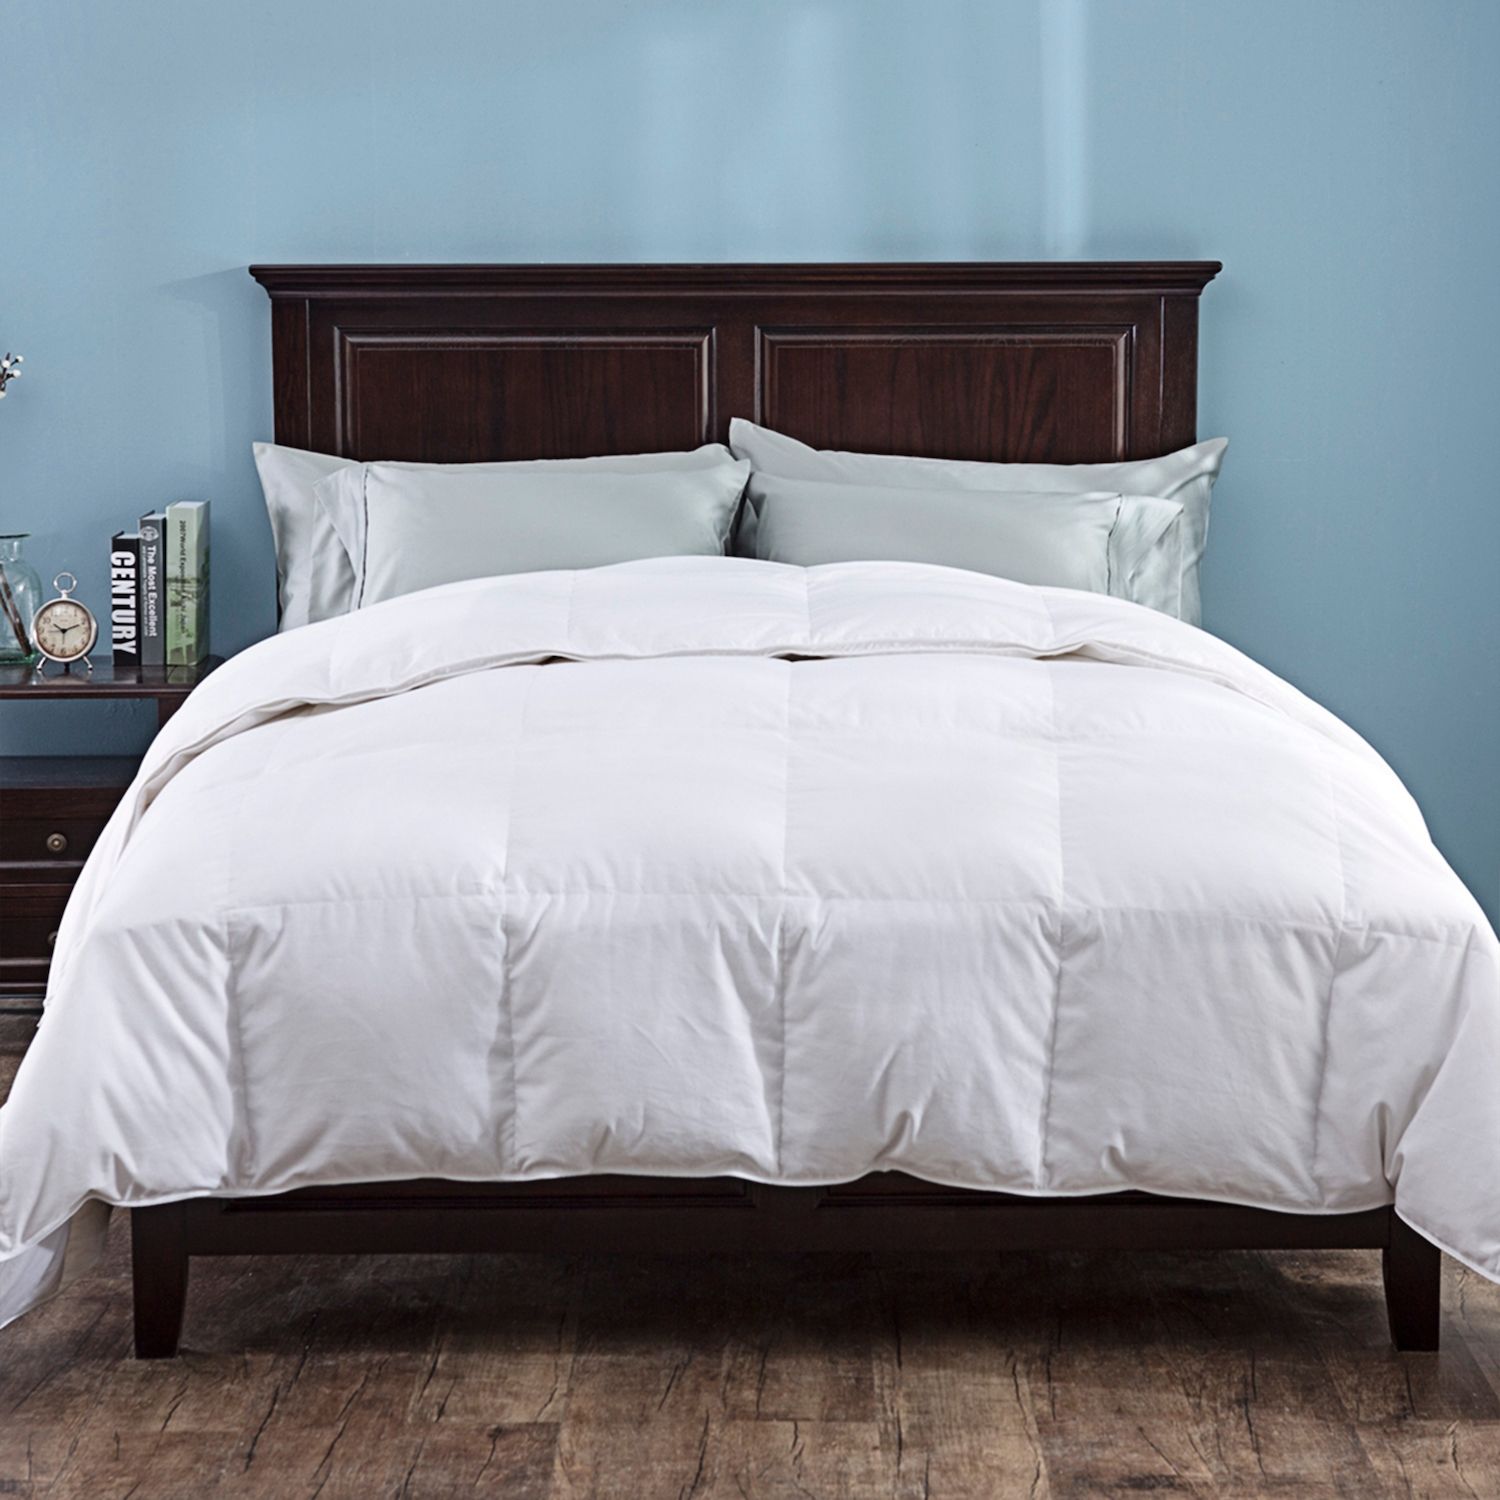 Image for Dream On Heavyweight White Goose Down Comforter, at Kohl's.